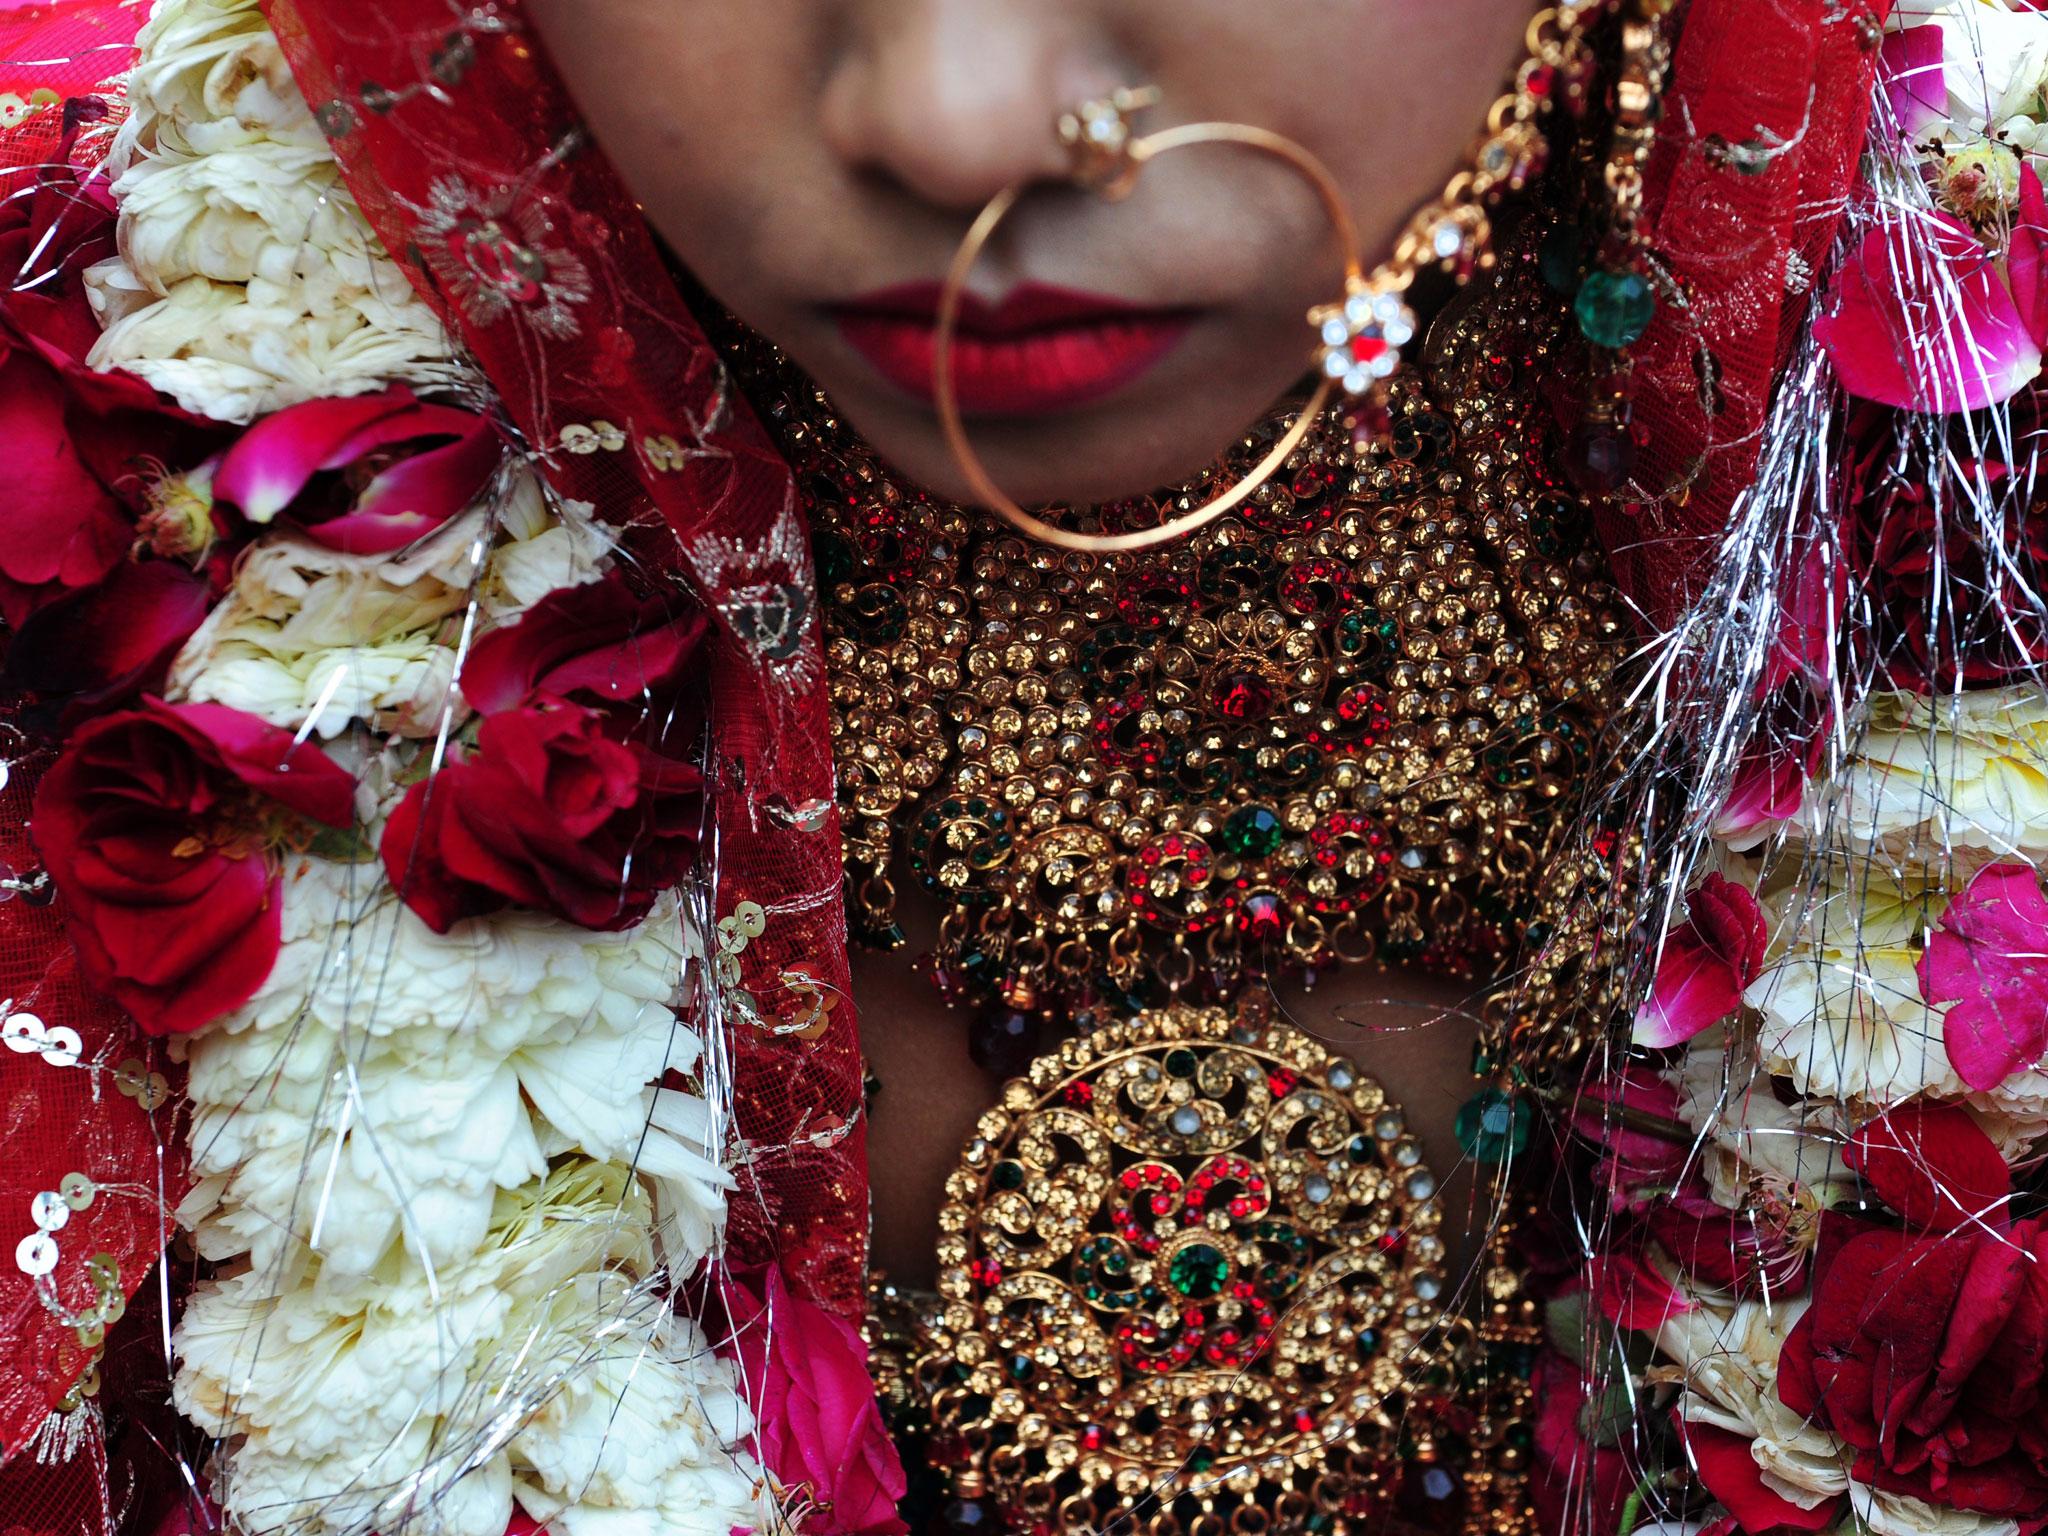 An Indian bride (file photo)